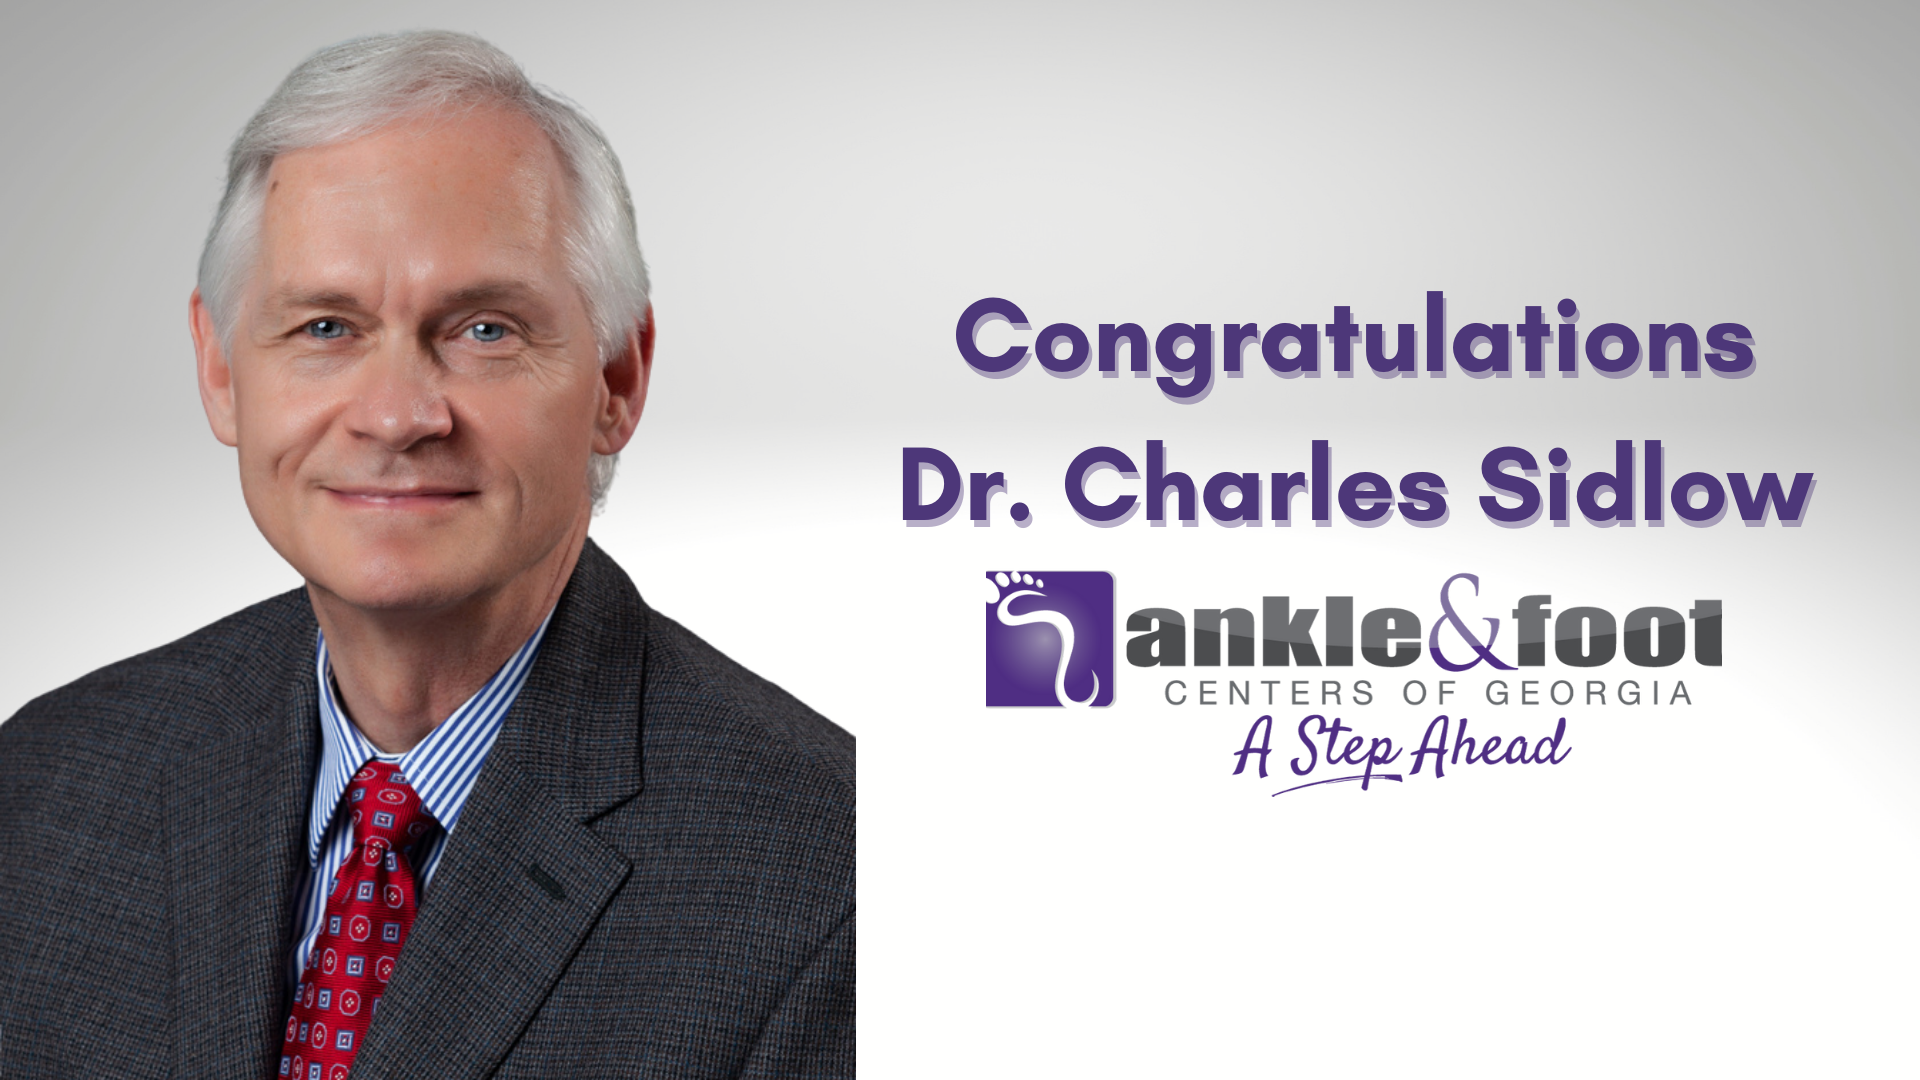 Congratulations to Dr. Charles Sidlow on his retirement!